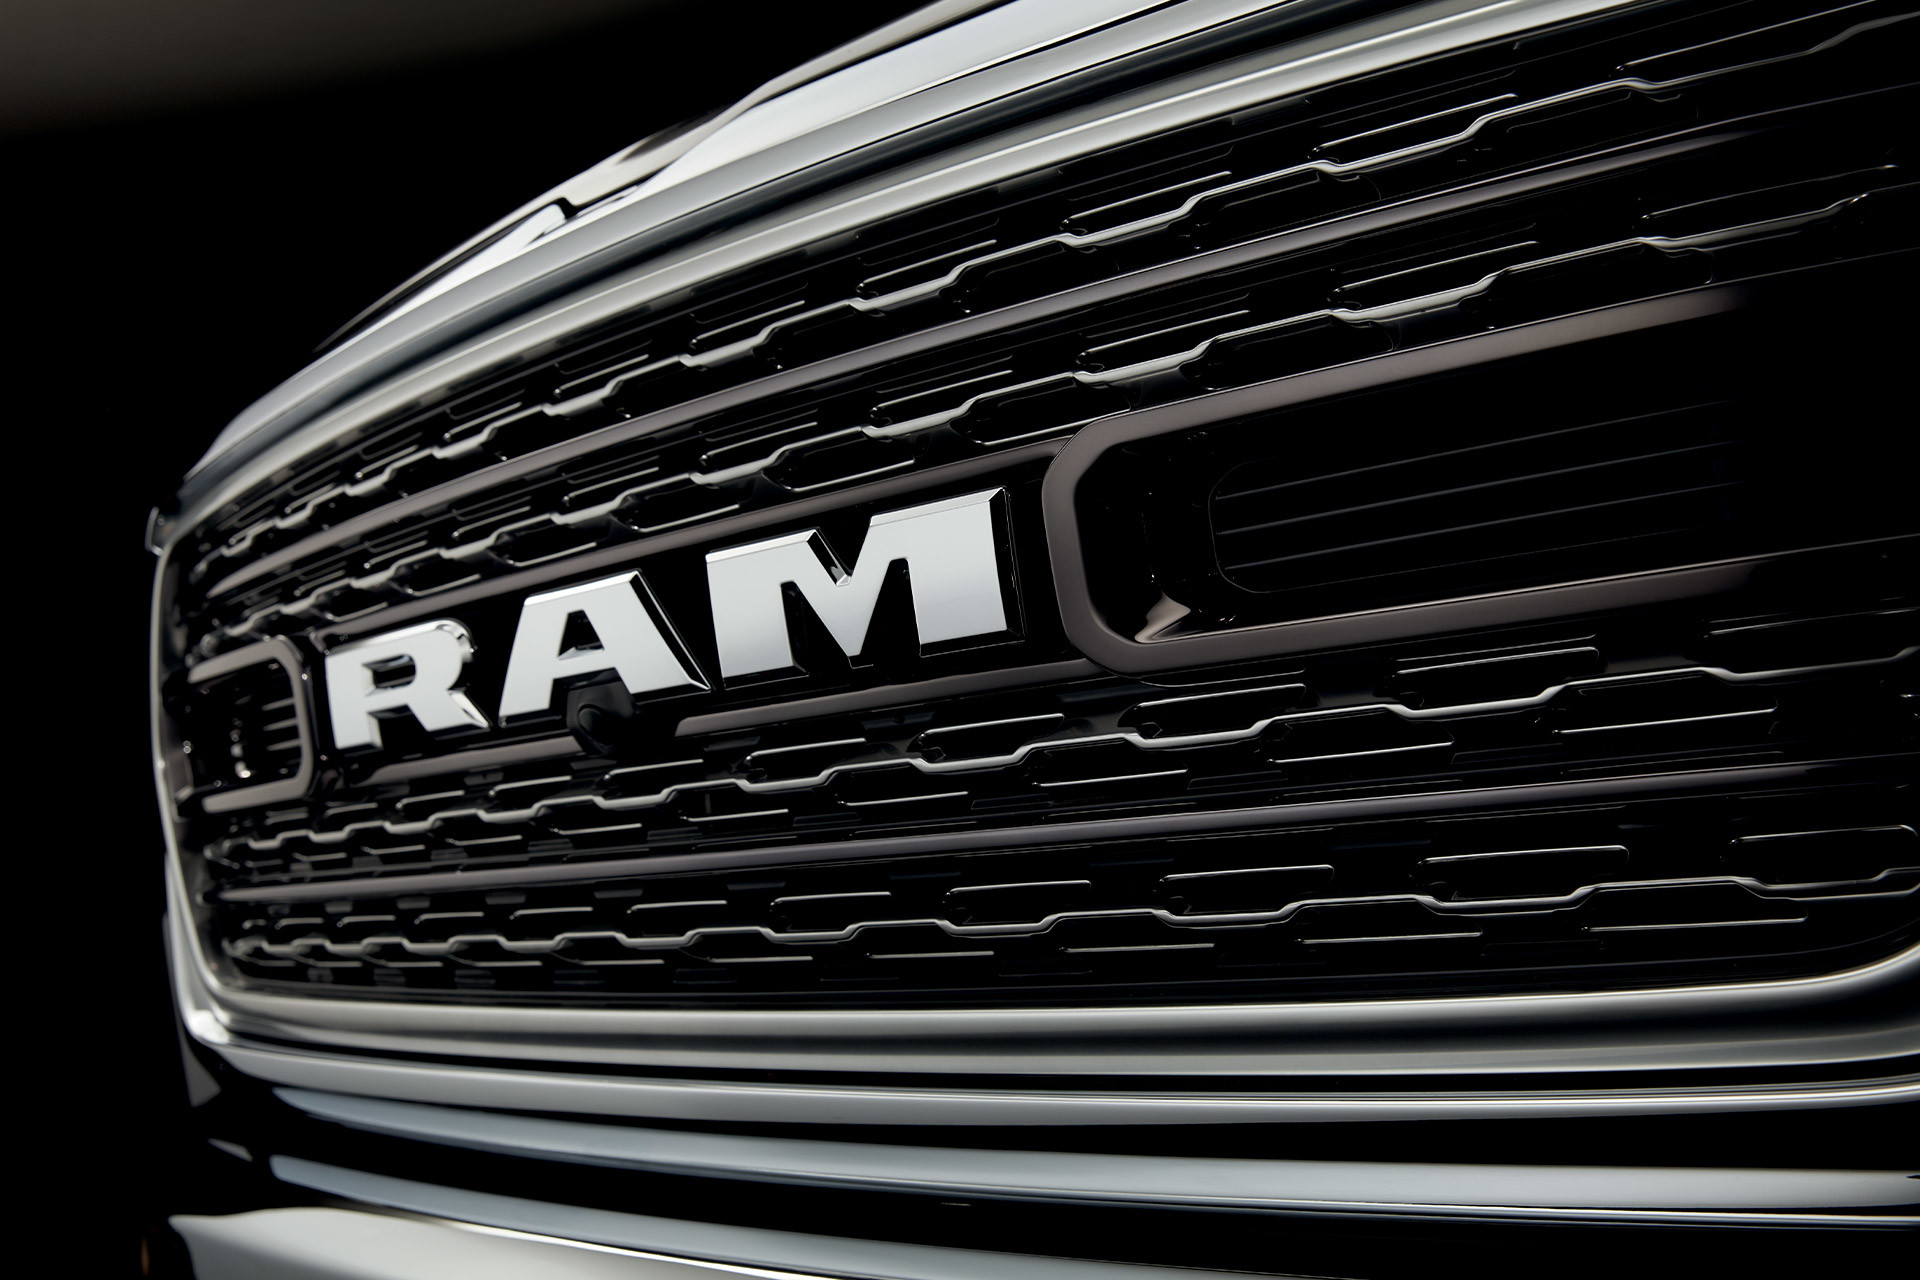 The front grill of the 2022 Ram 1500 with the logo